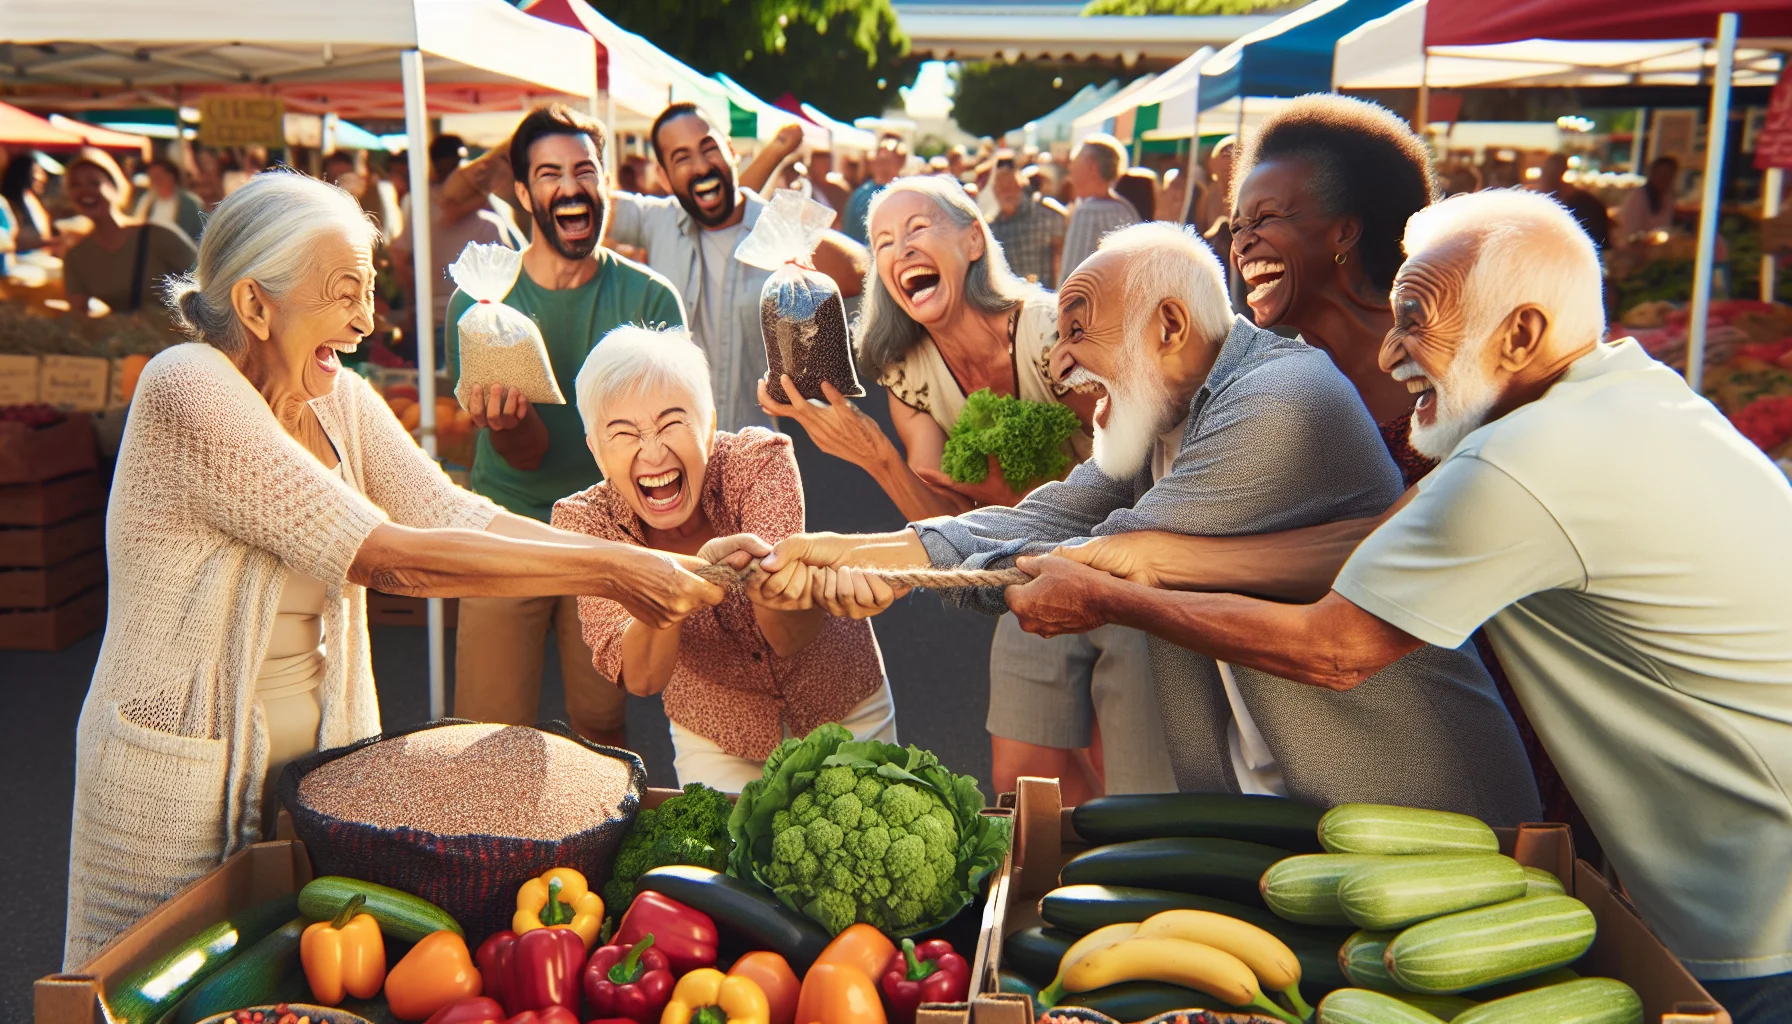 Imagine a humorous scene that takes place at a sunny, vibrant farmers' market. On display are an array of high fiber, low fodmap foods including fruits like bananas and berries, vegetables such as bell peppers and zucchini, and grains like brown rice. An elderly South Asian woman and a Middle-Eastern elderly man are having a playful tug-of-war over the last bag of quinoa, attracting cheerful laughter from the crowd. They're both laughing too, their eyes twinkling. Off to the side, a Caucasian elderly couple is enjoying a hefty salad mix, laughing with lettuce stuck to their teeth. To top it all off, a sprightly Black elderly man is doing a fun dance with a celery stick in his hand.